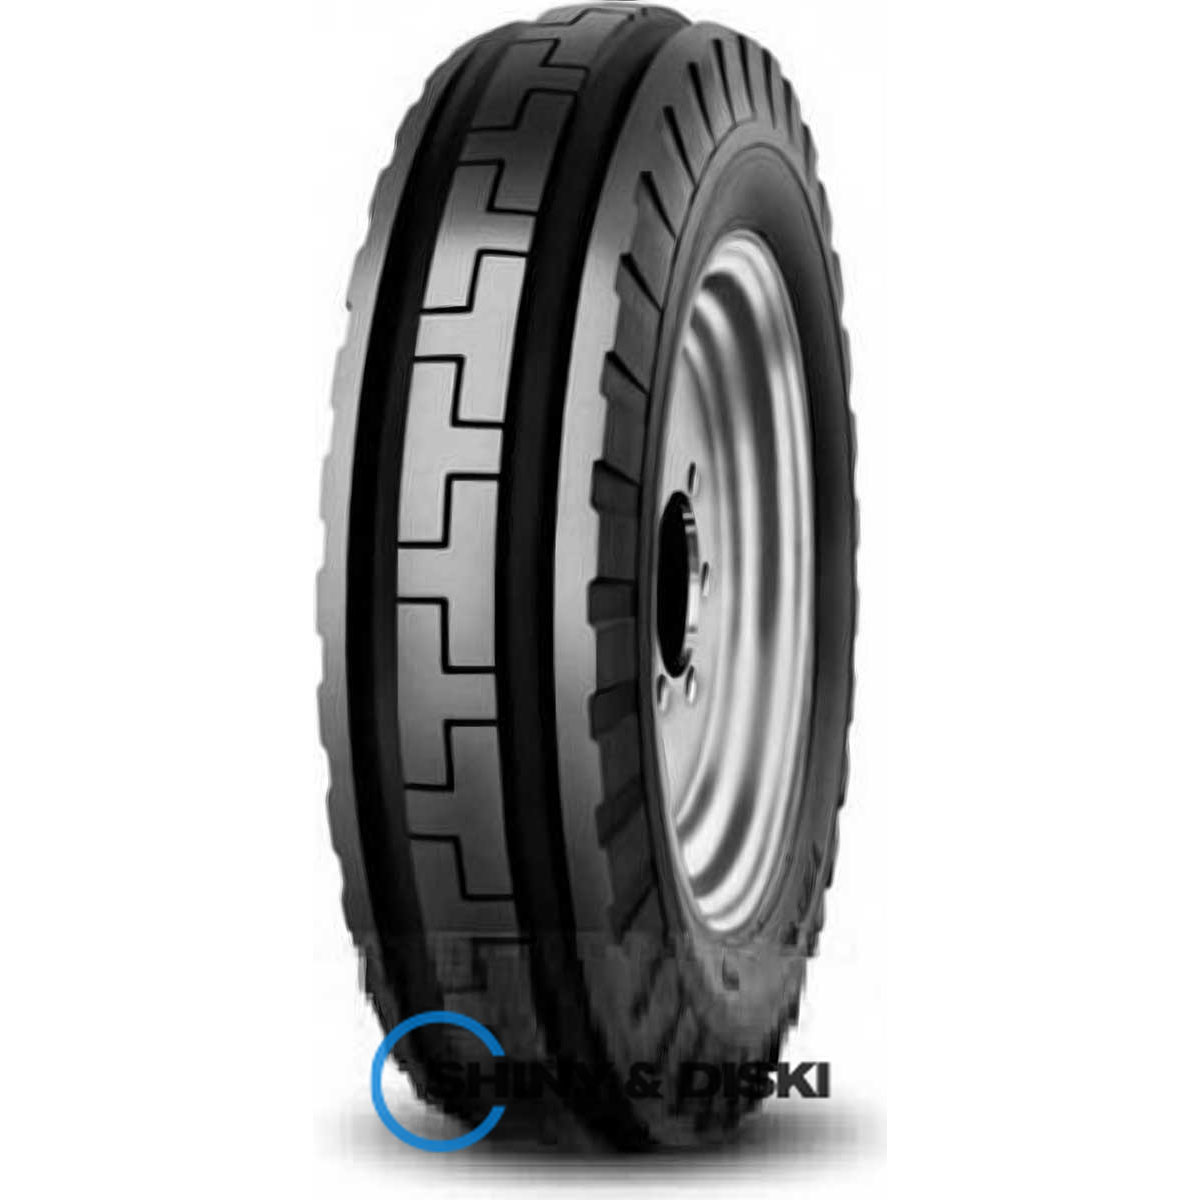 cultor as front 08 6.50 r16 91a6/83a8